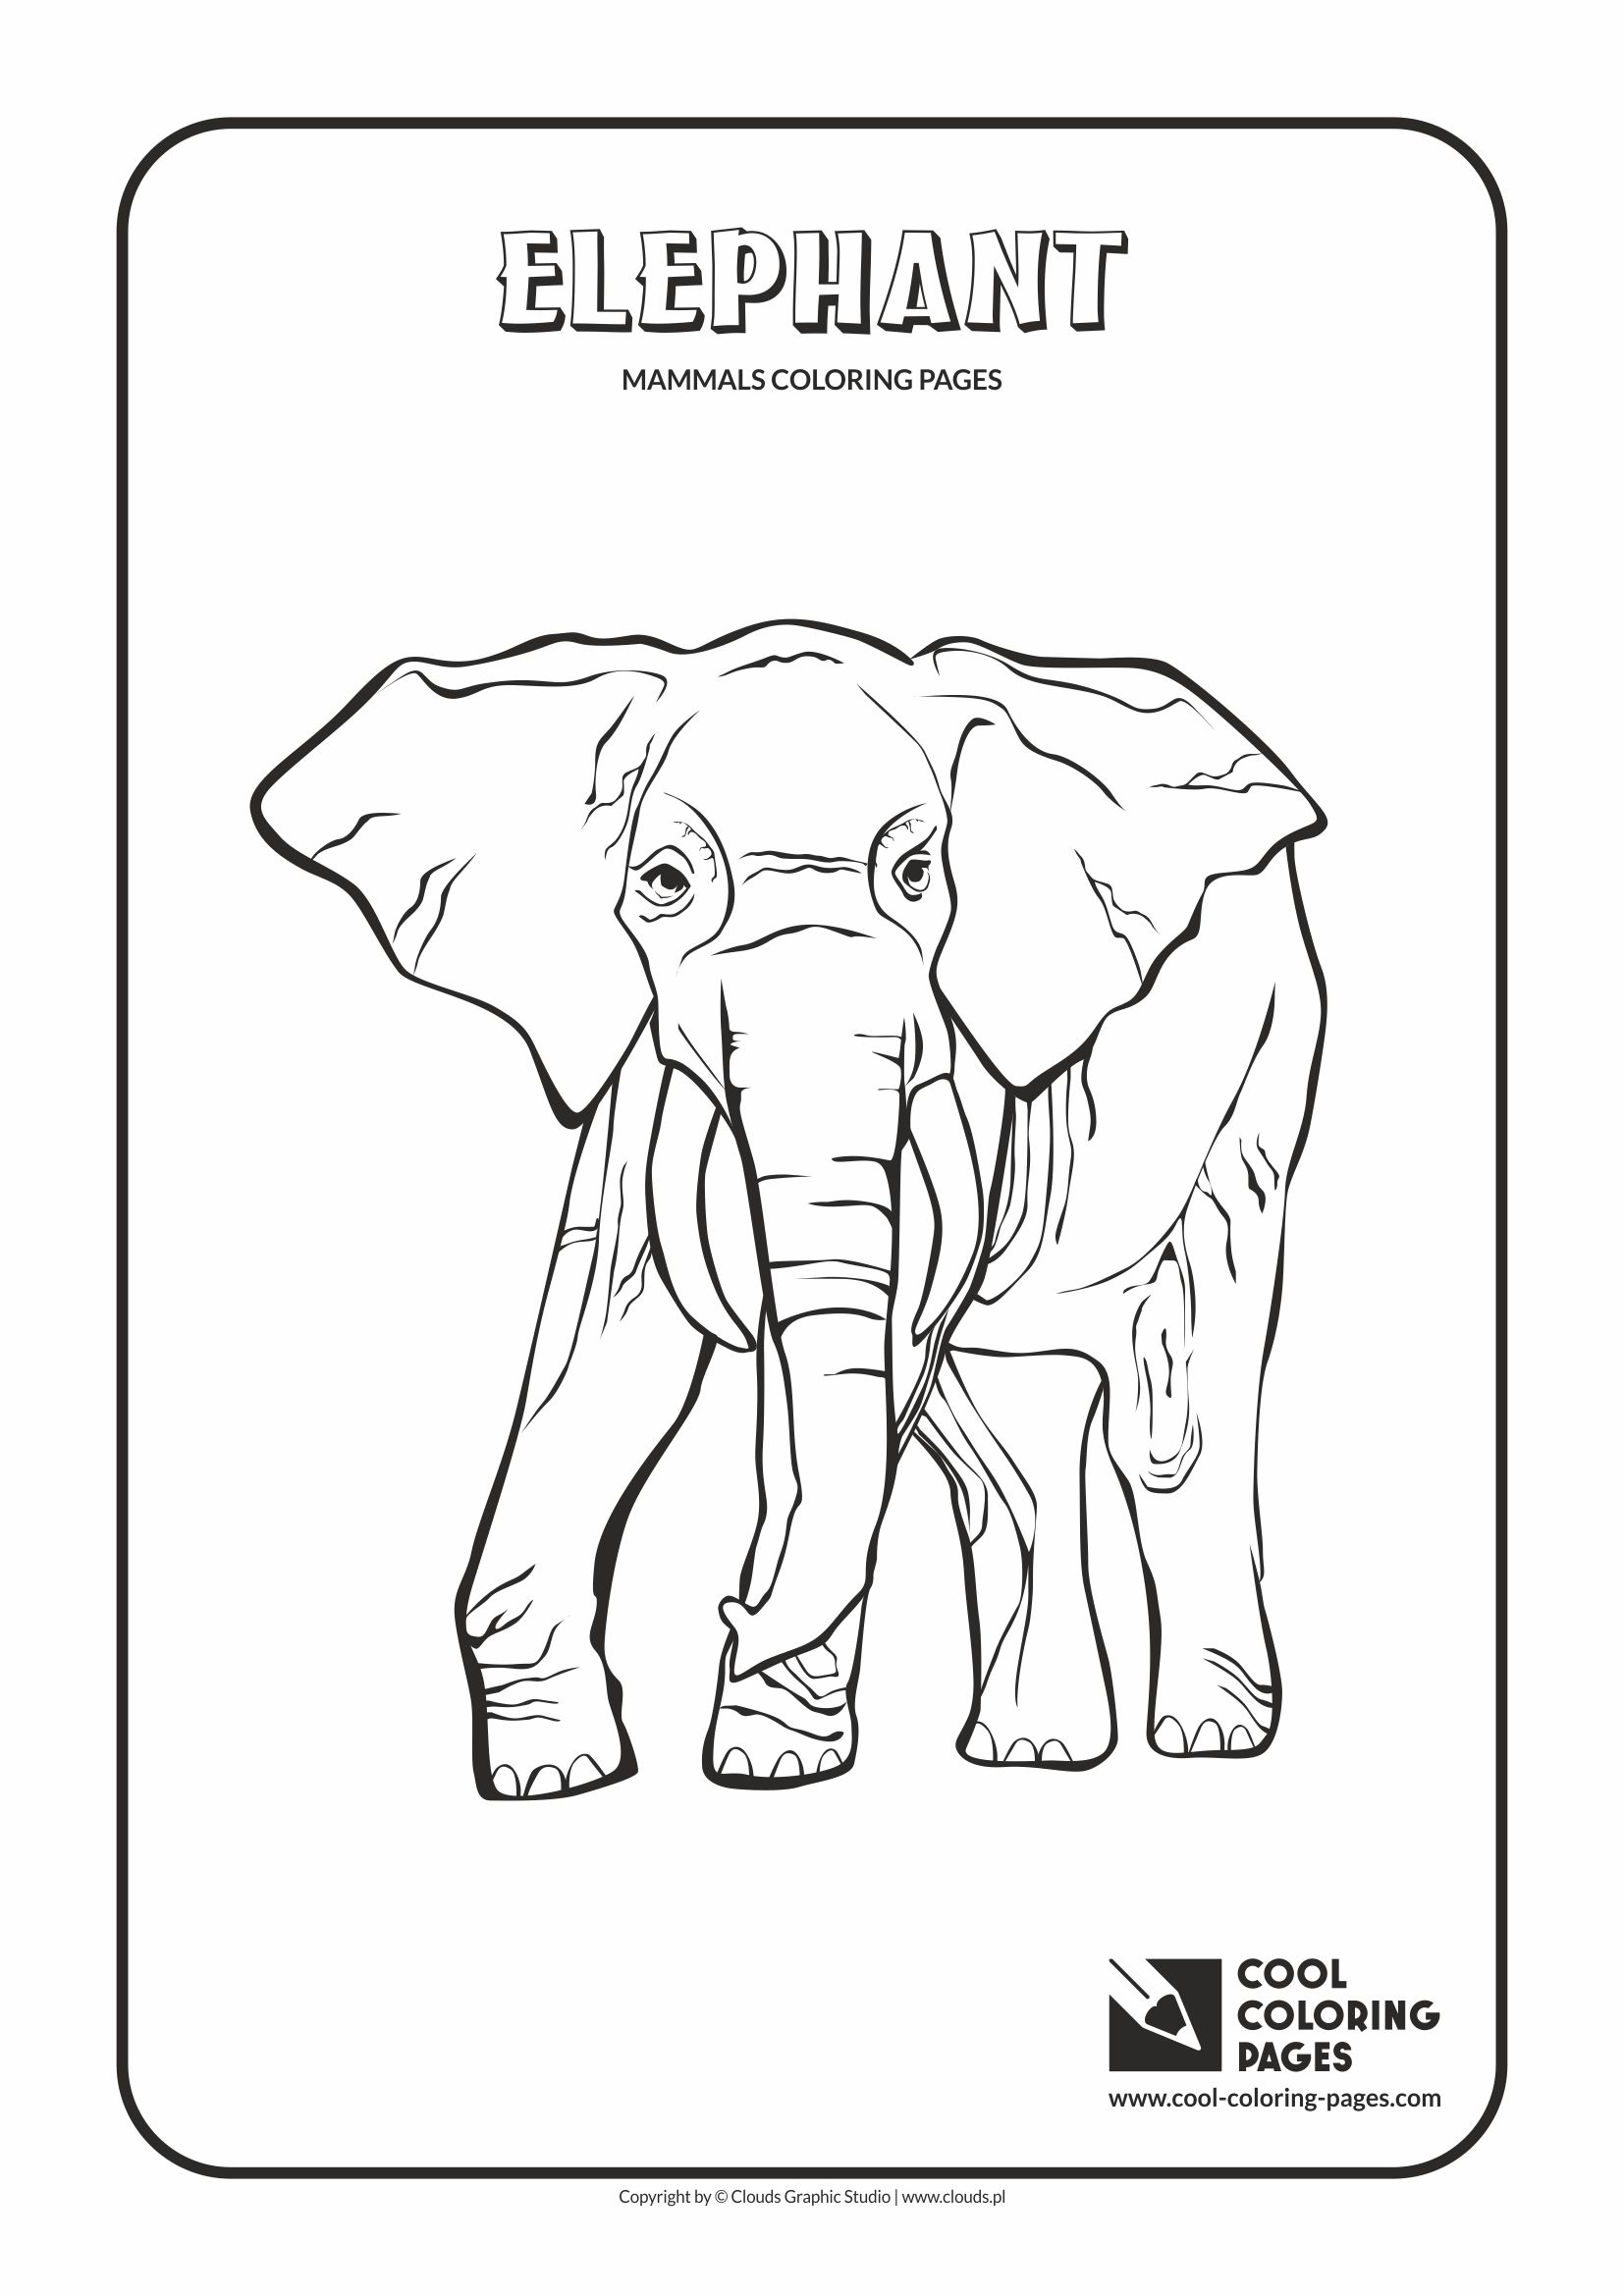 Cool Coloring Pages - Animals / Mammals. Coloring page with elephant